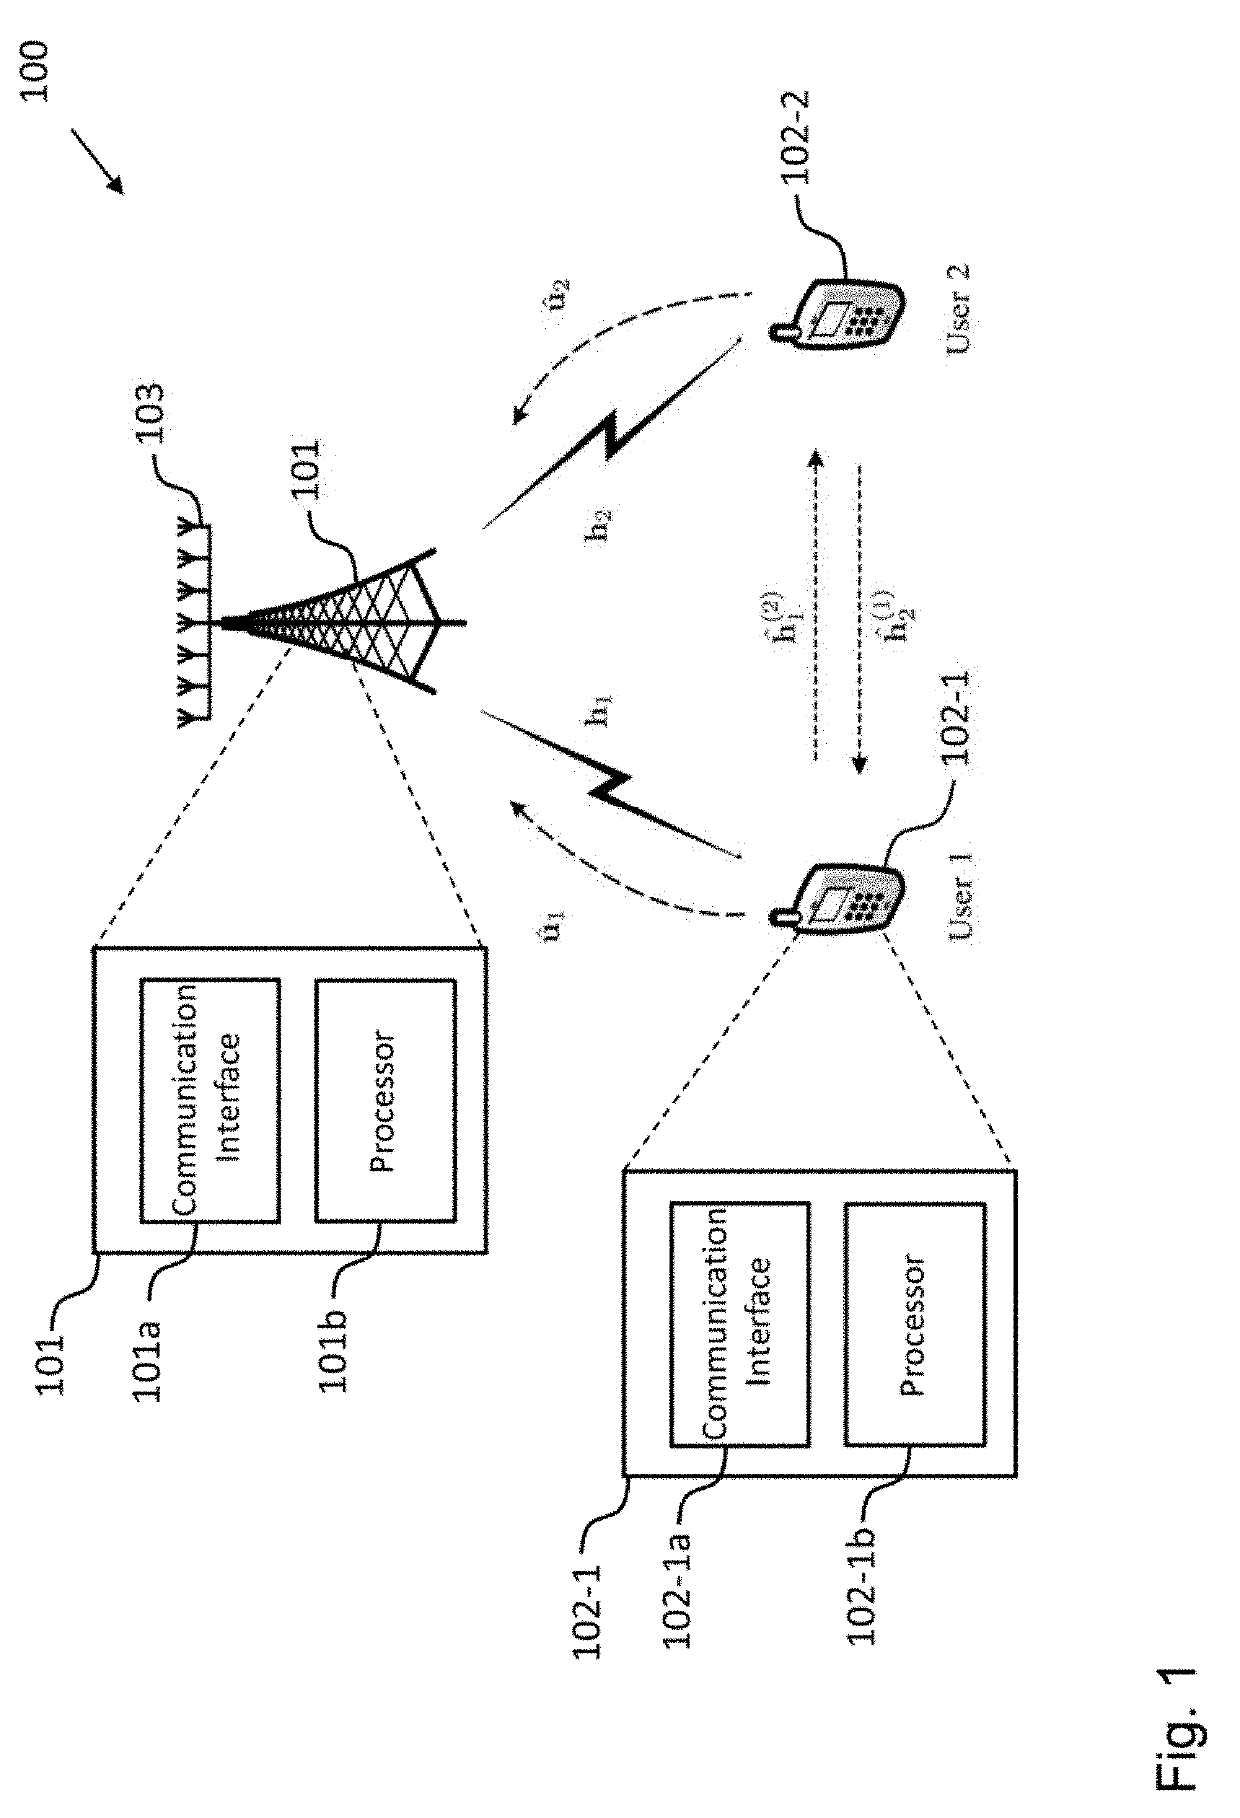 User communication device and method for cellular communication with a base station and d2d communication